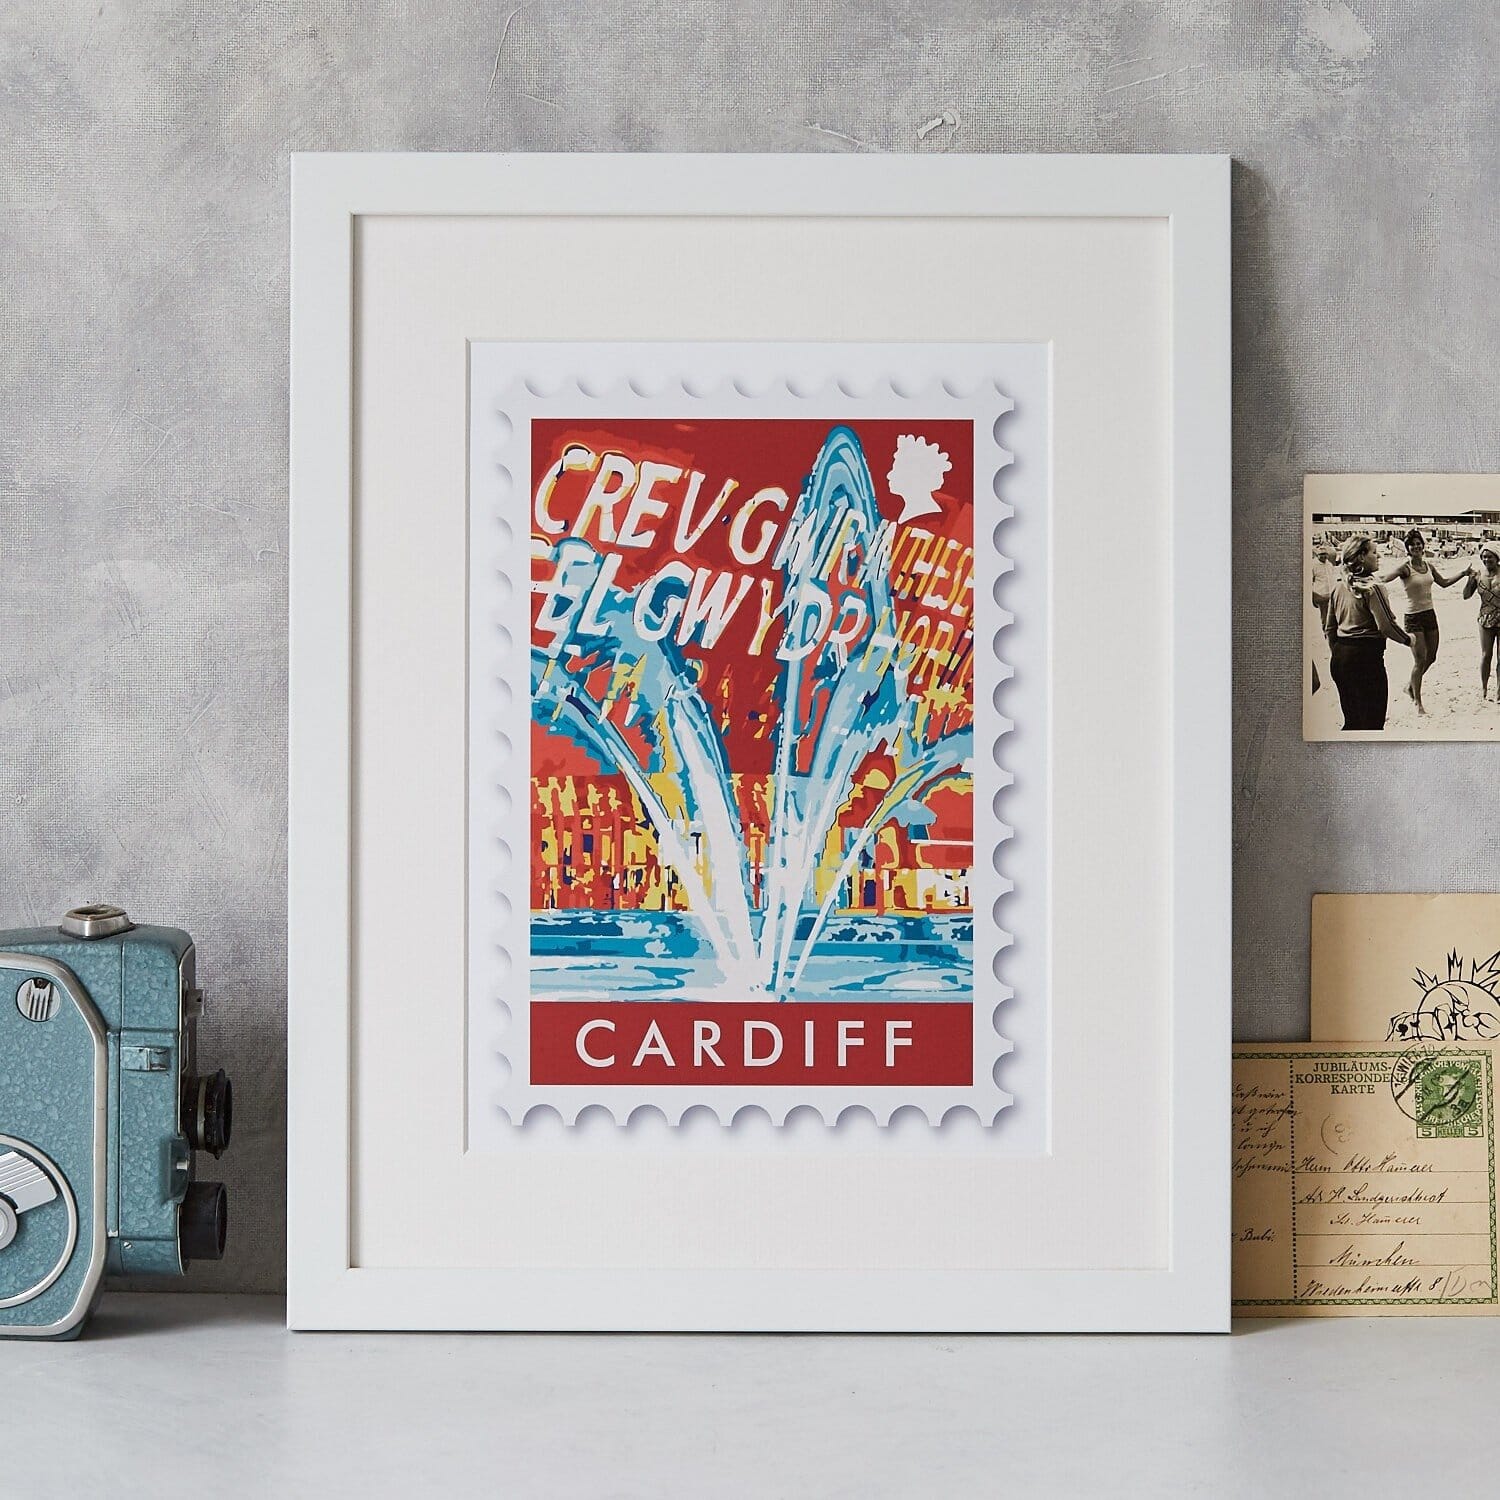 postage stamp style art print of the Wales Millennium Centre in Cardiff.